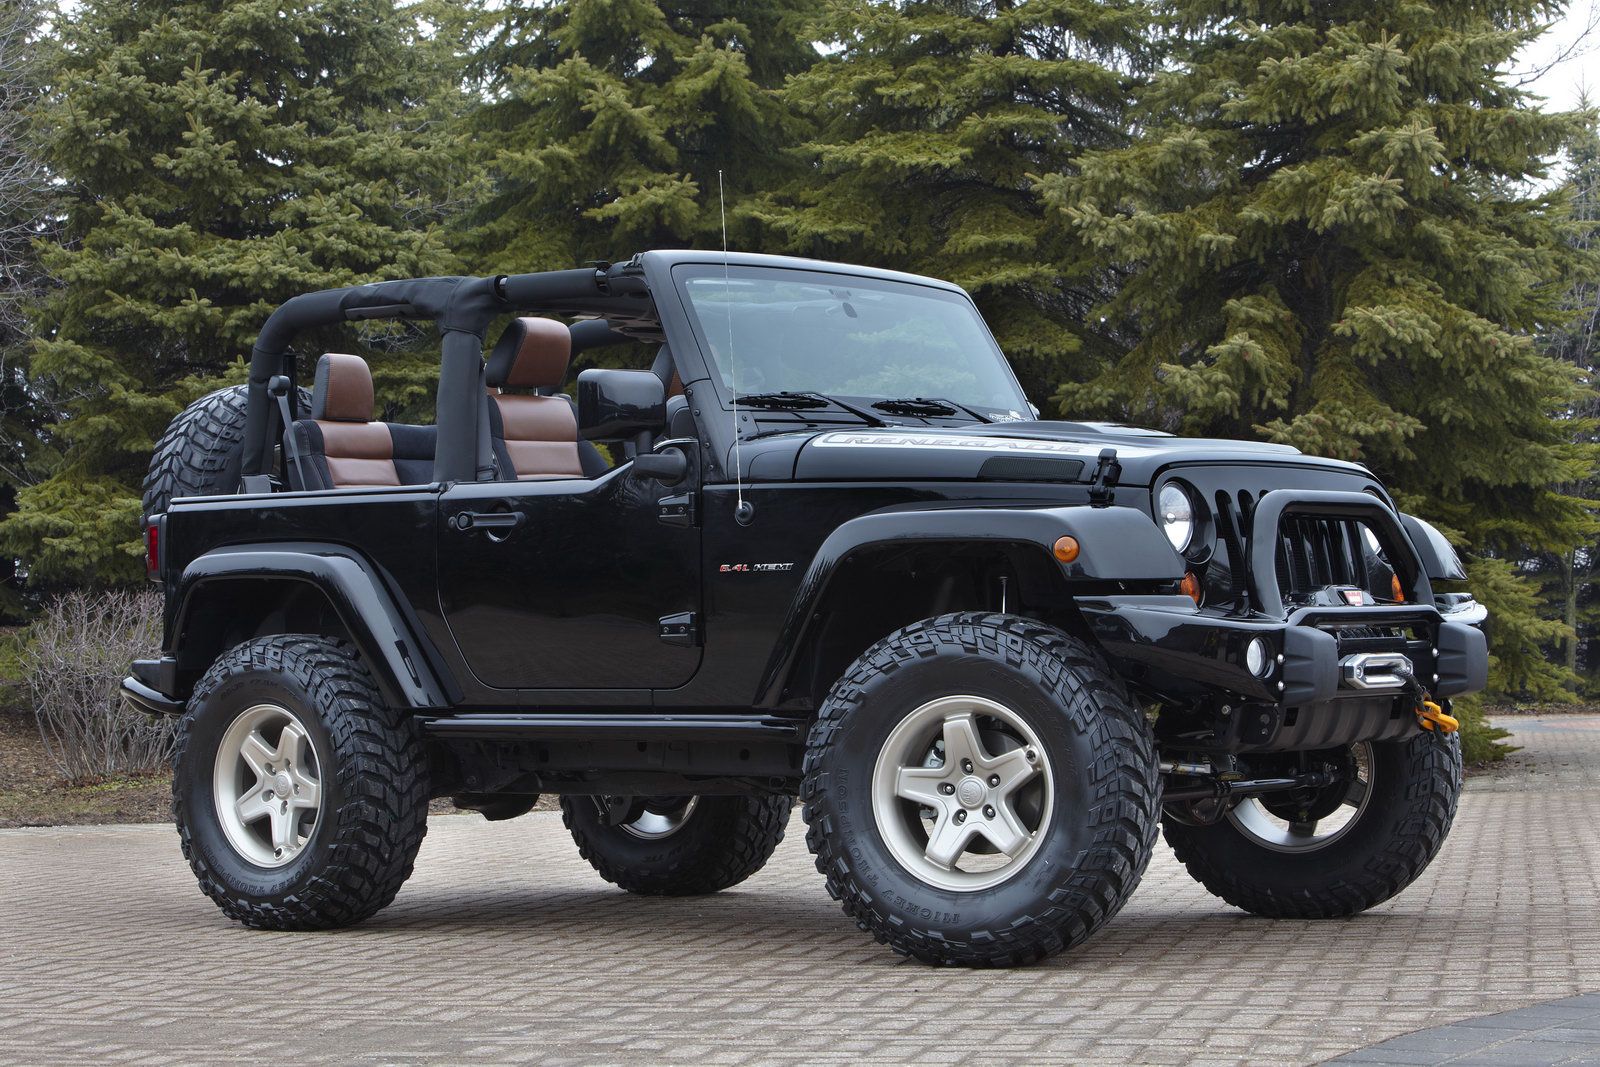 Sell your Jeep for Quick and Easy Cash